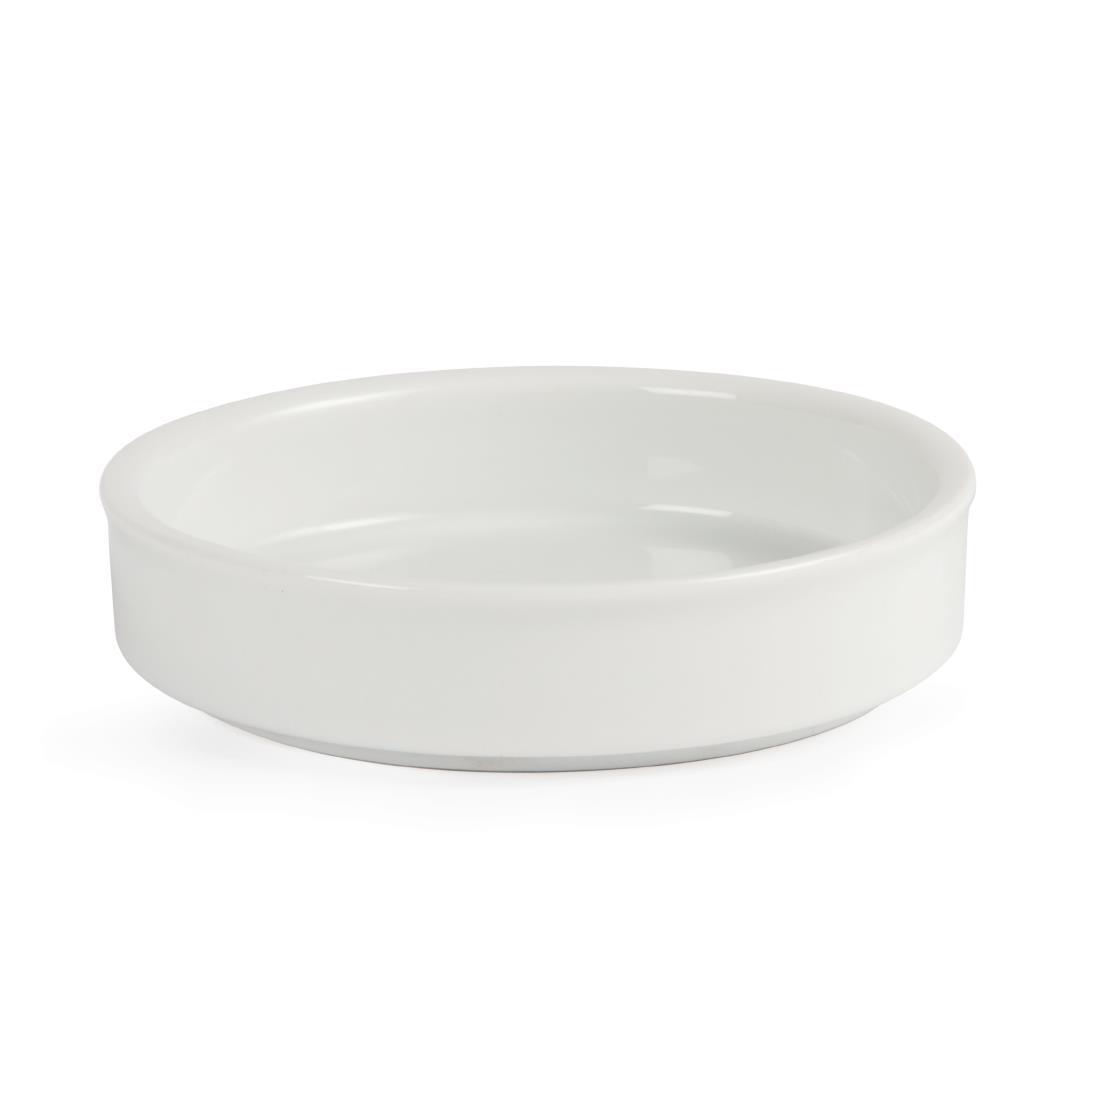 Olympia Mediterranean Stackable Dishes White 102mm (Pack of 6) - DK827  - 2